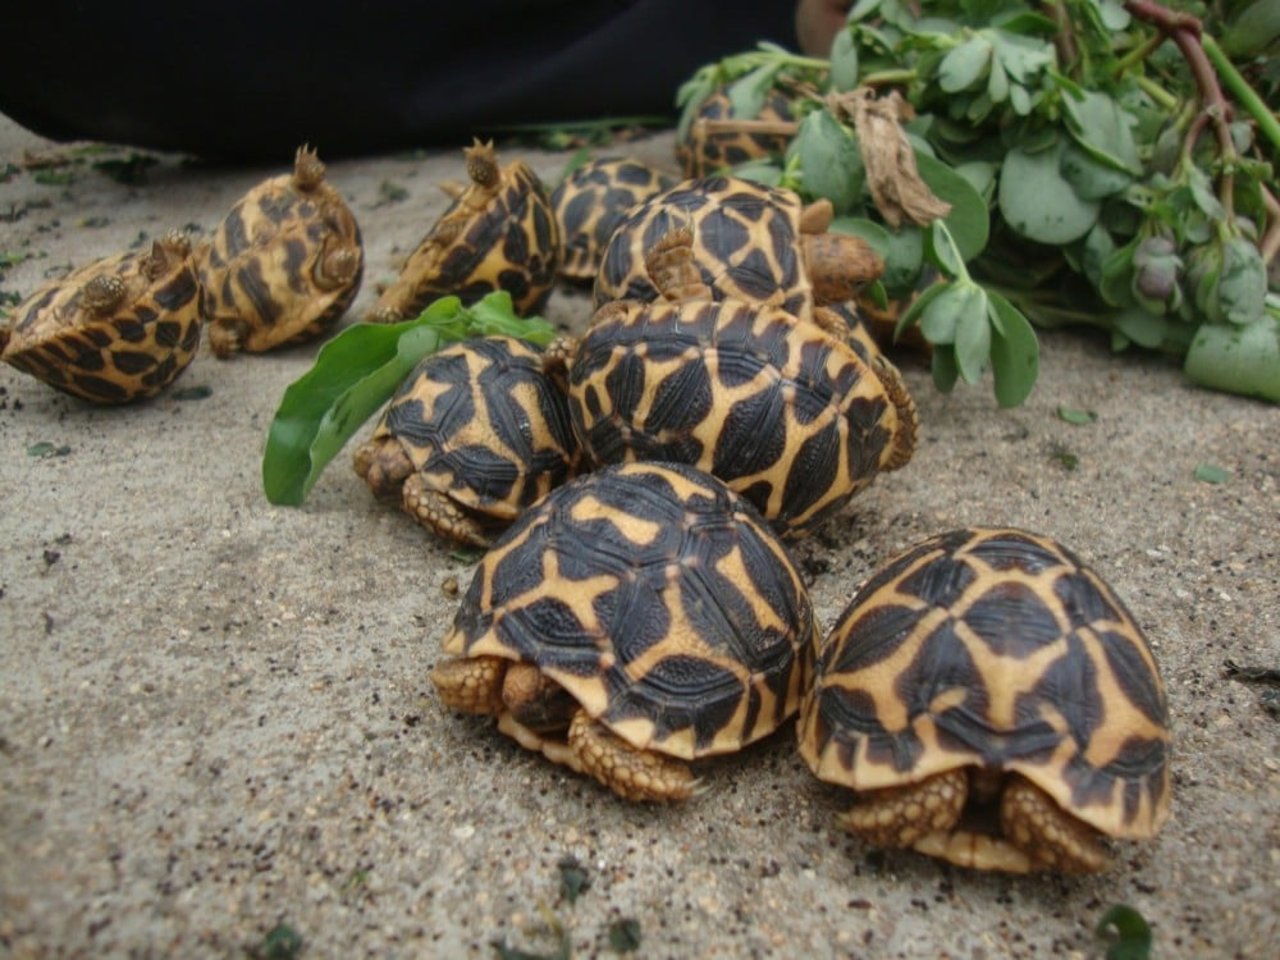 Indian star tortoises being bagged and prepared for export - Wildlife. Not pets - World Animal Protection